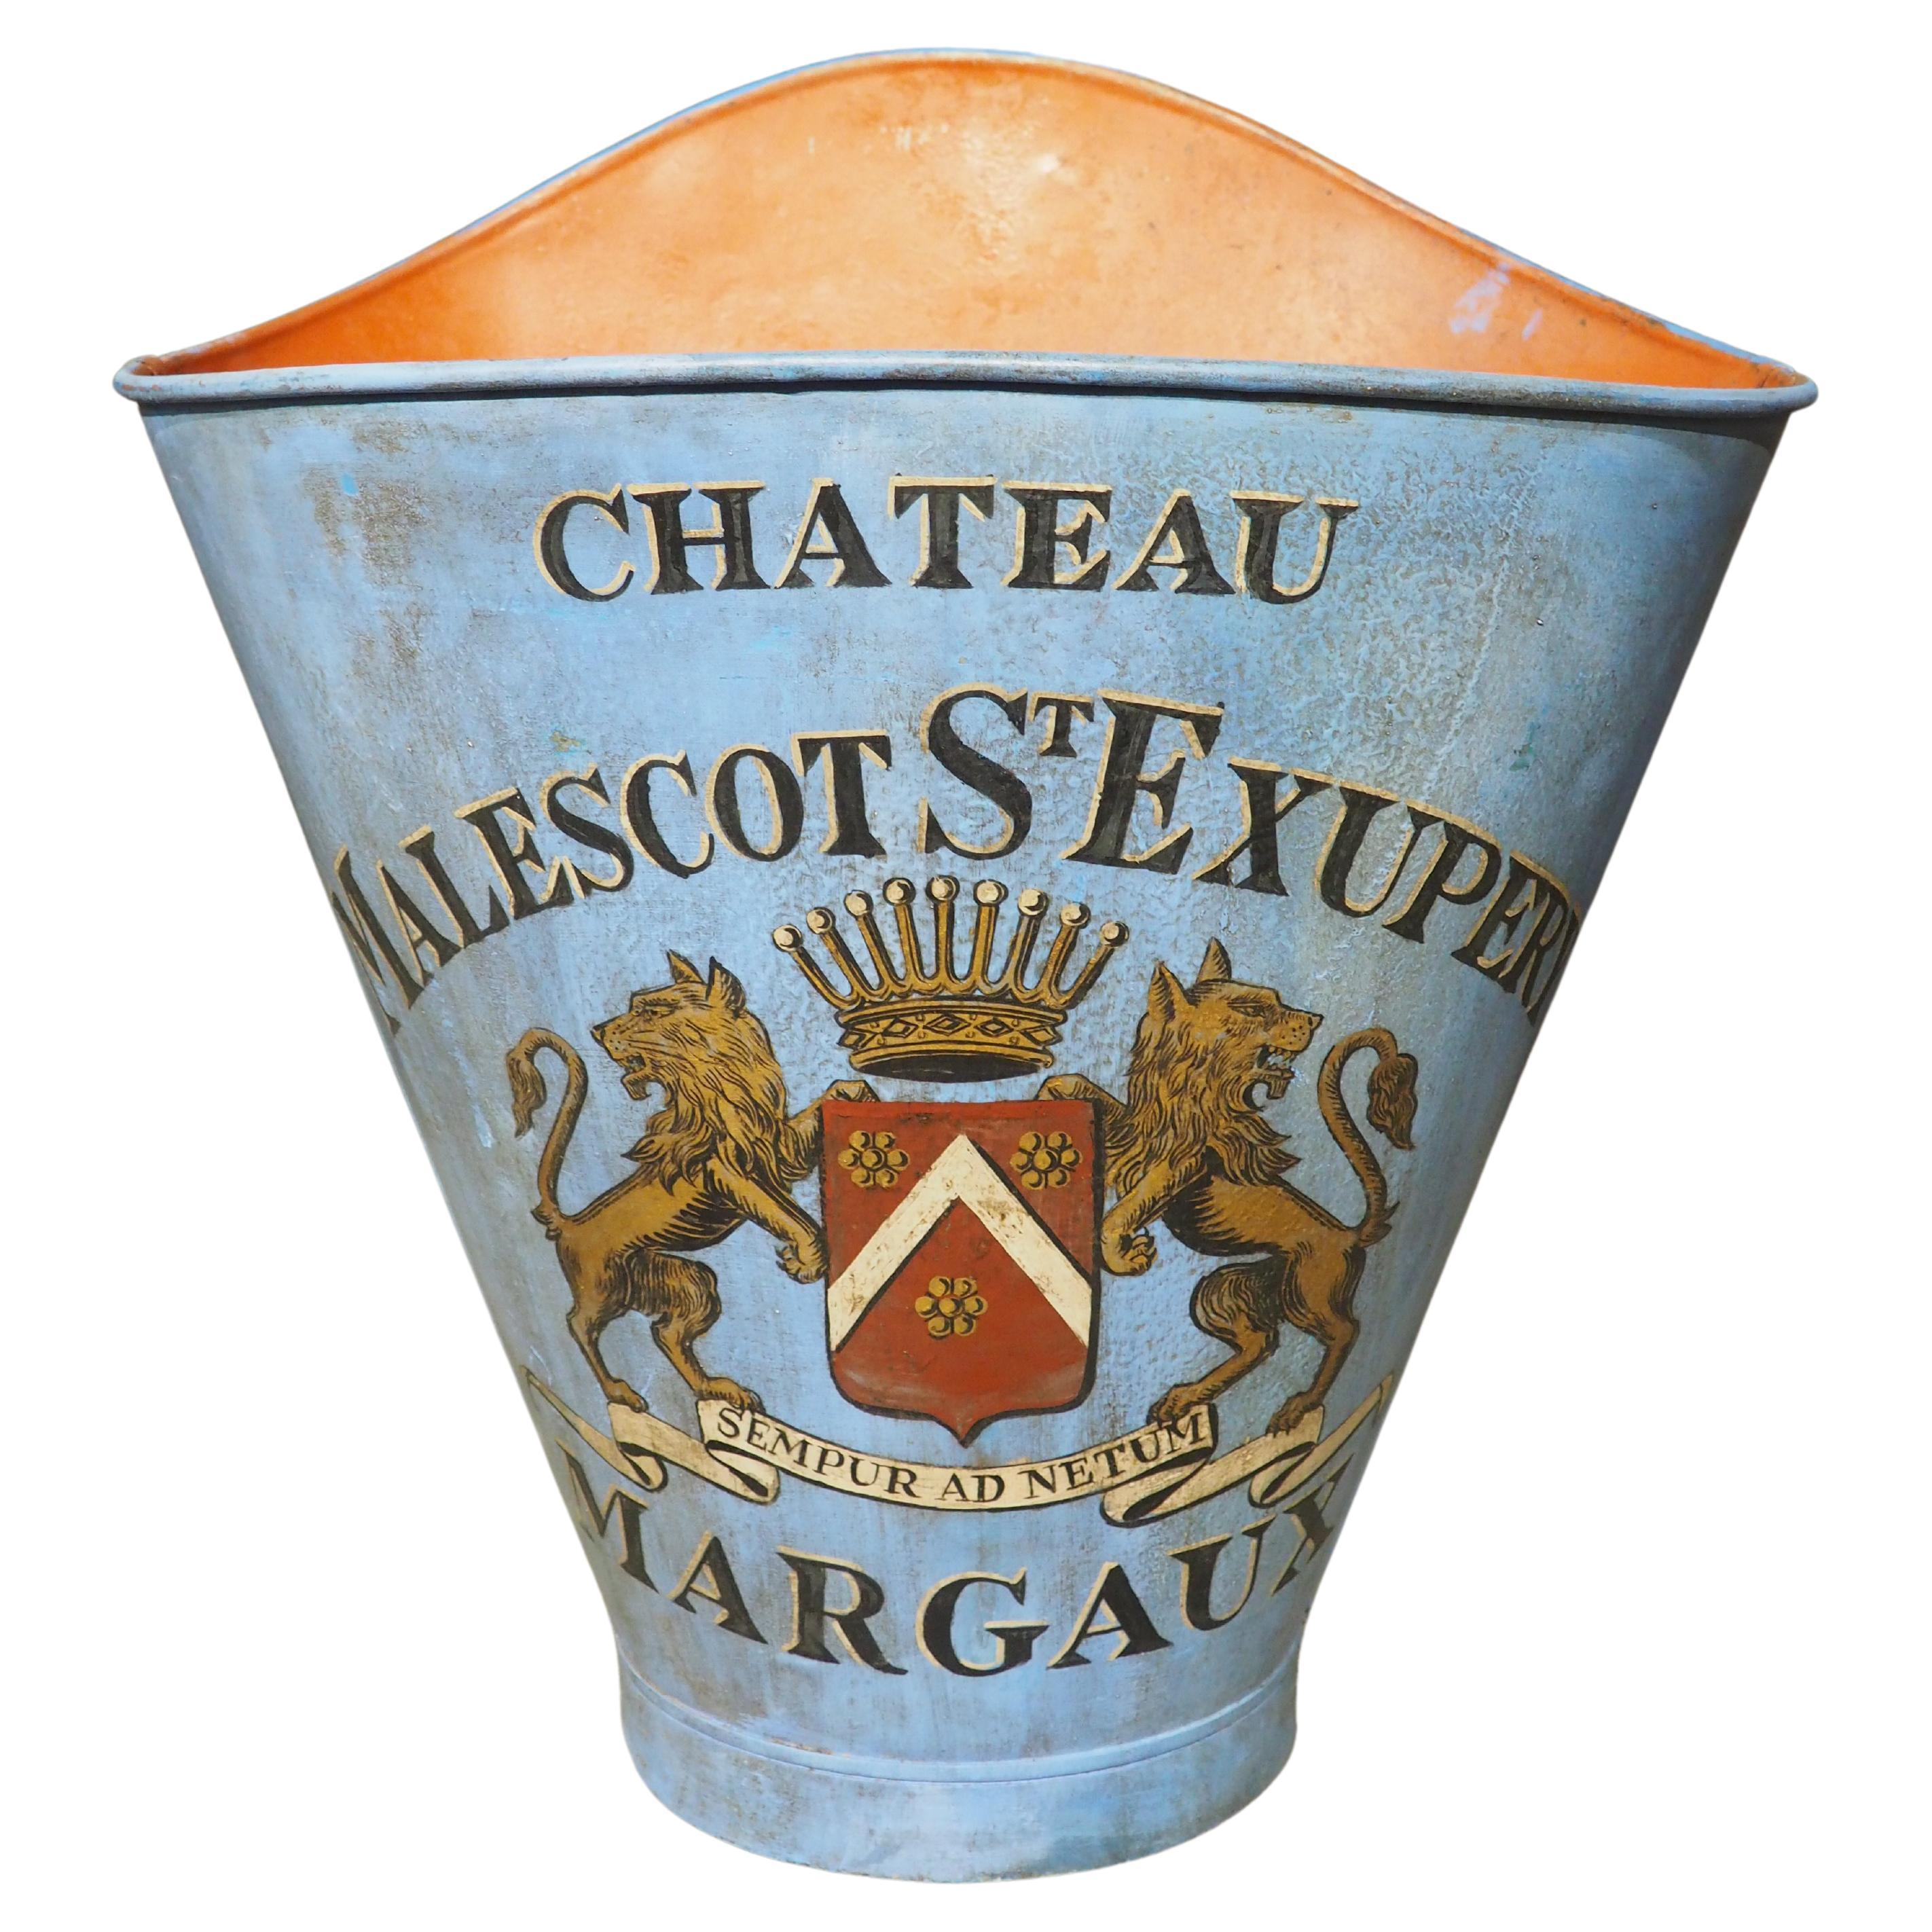 Antique “Château Malescot St. Exupéry” Grape Harvesting Hotte from France